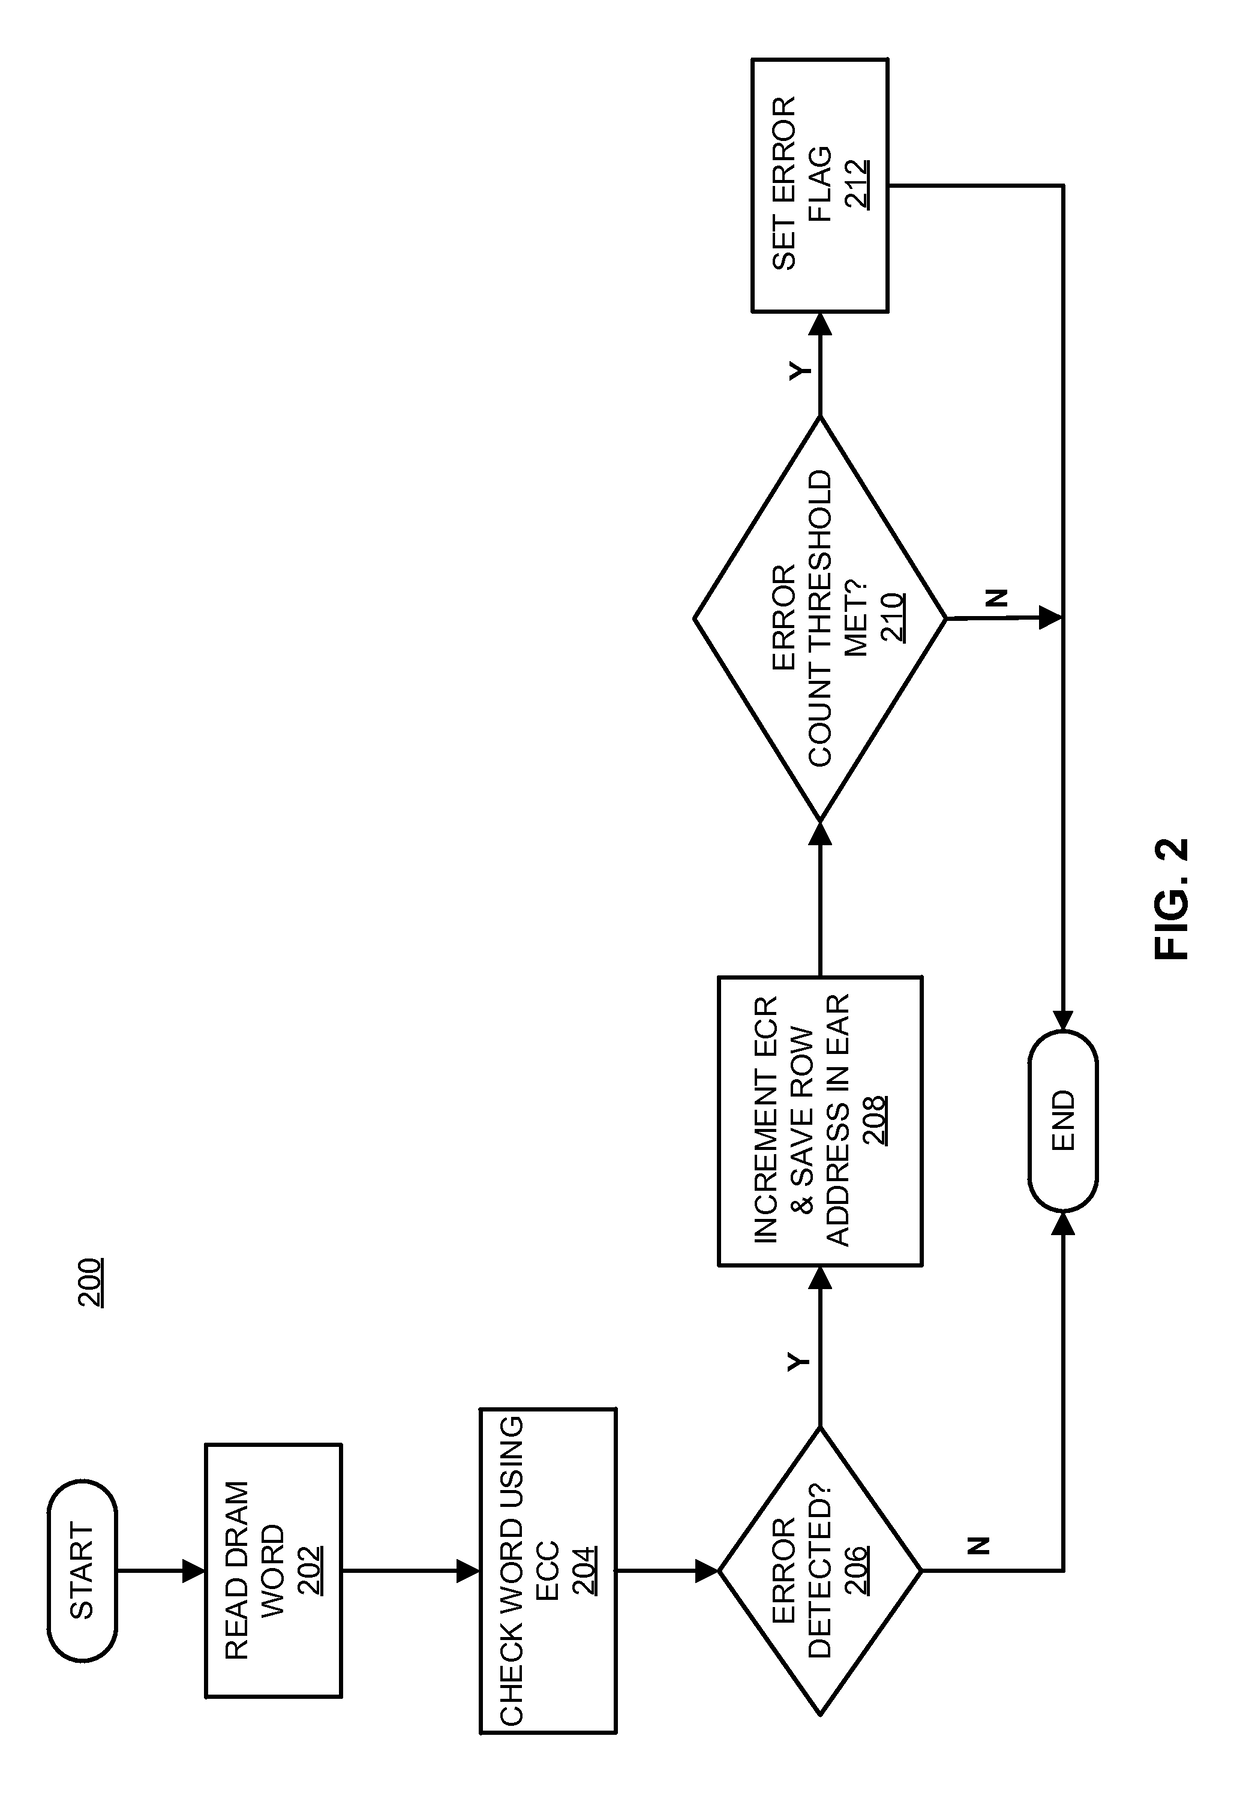 Error monitoring of a memory device containing embedded error correction